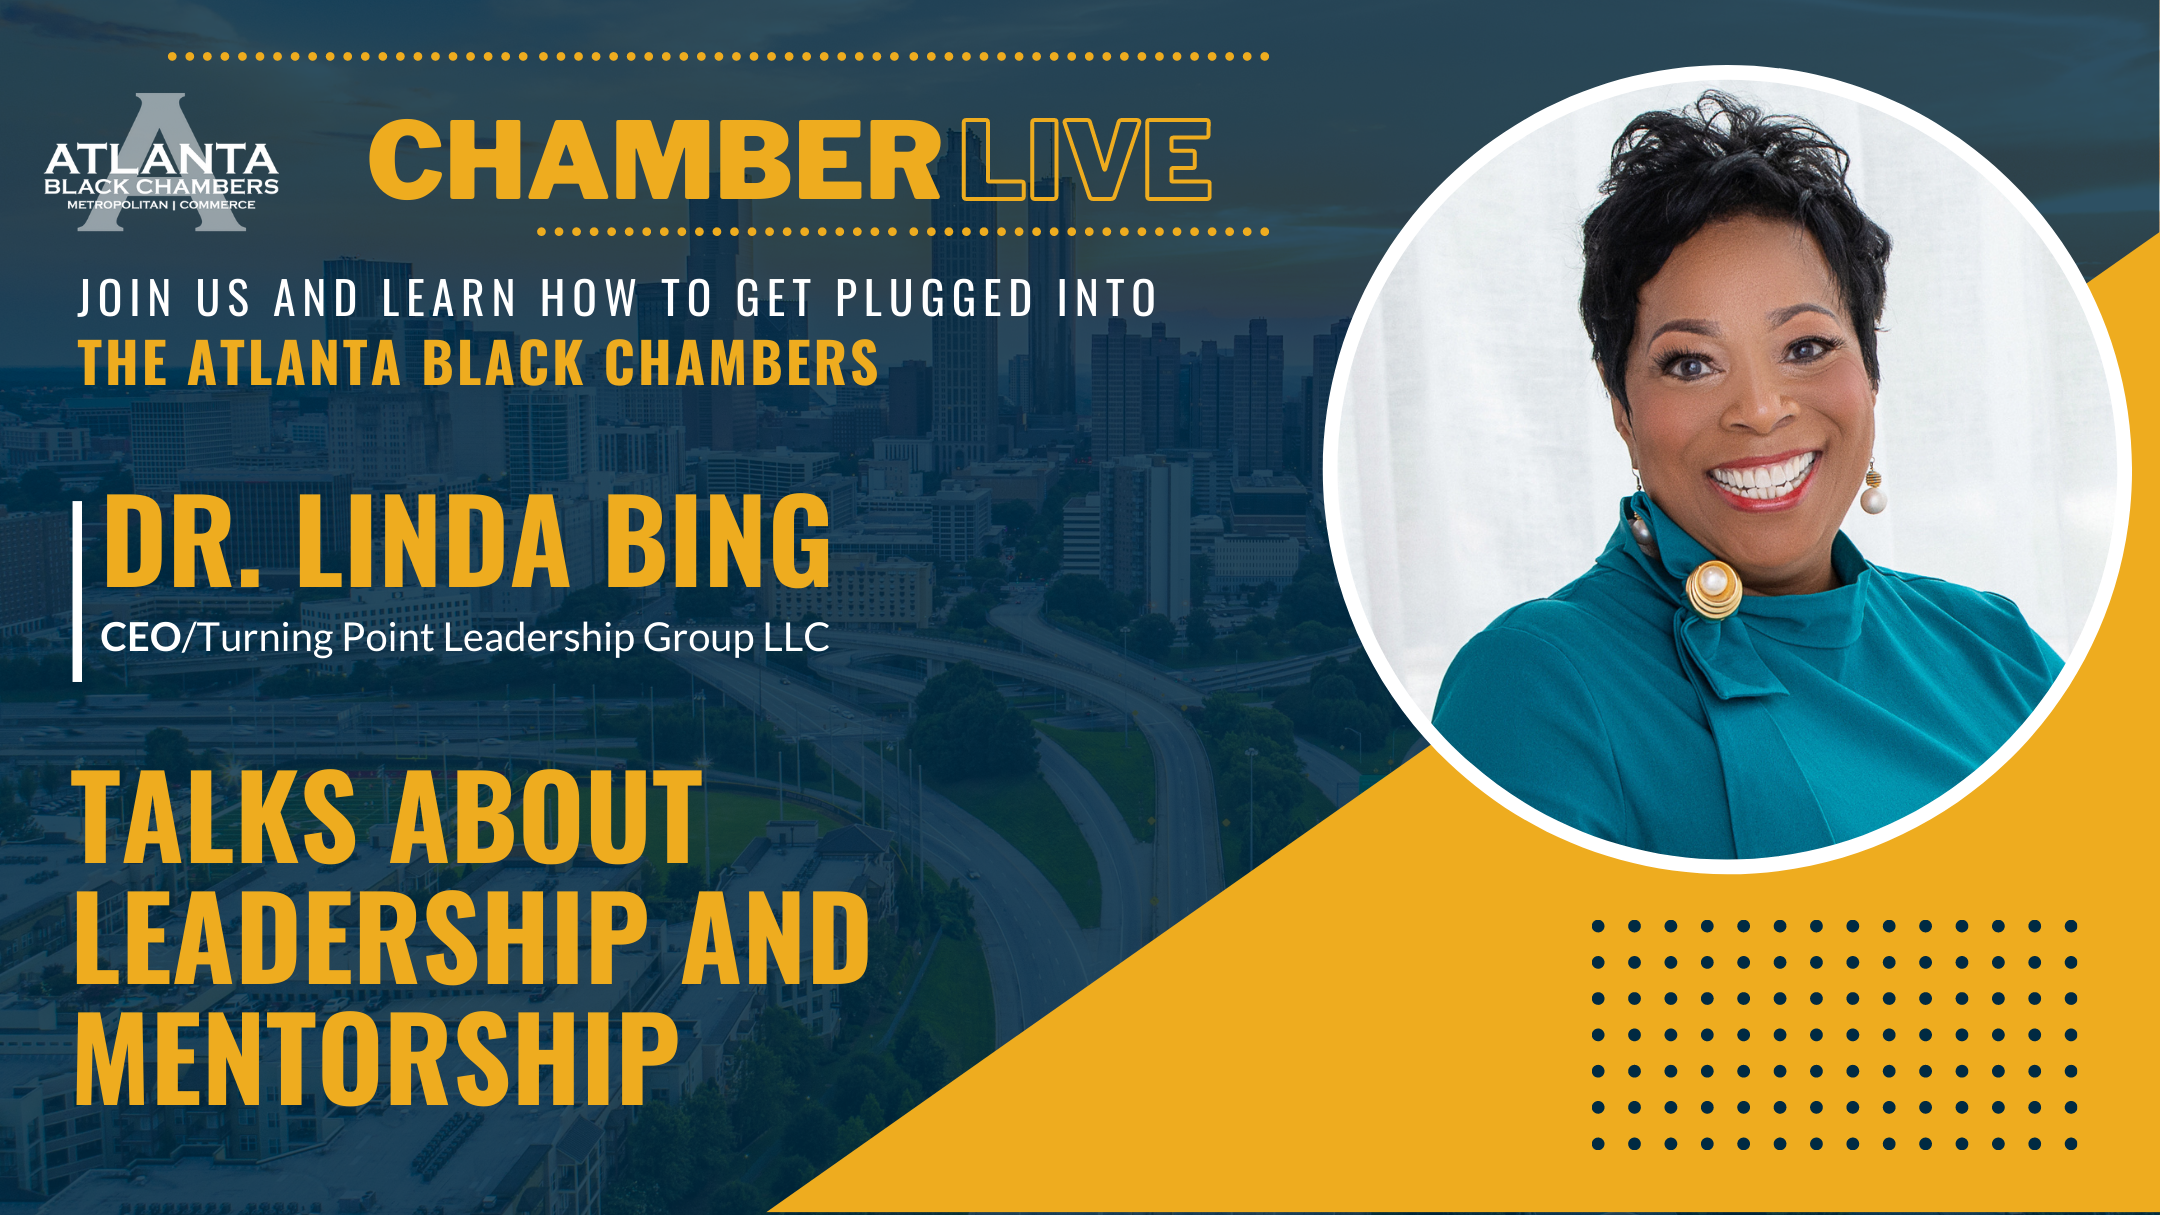 Dr. Lina Bing Talks About Leadership and Mentorship on #ChamberLive